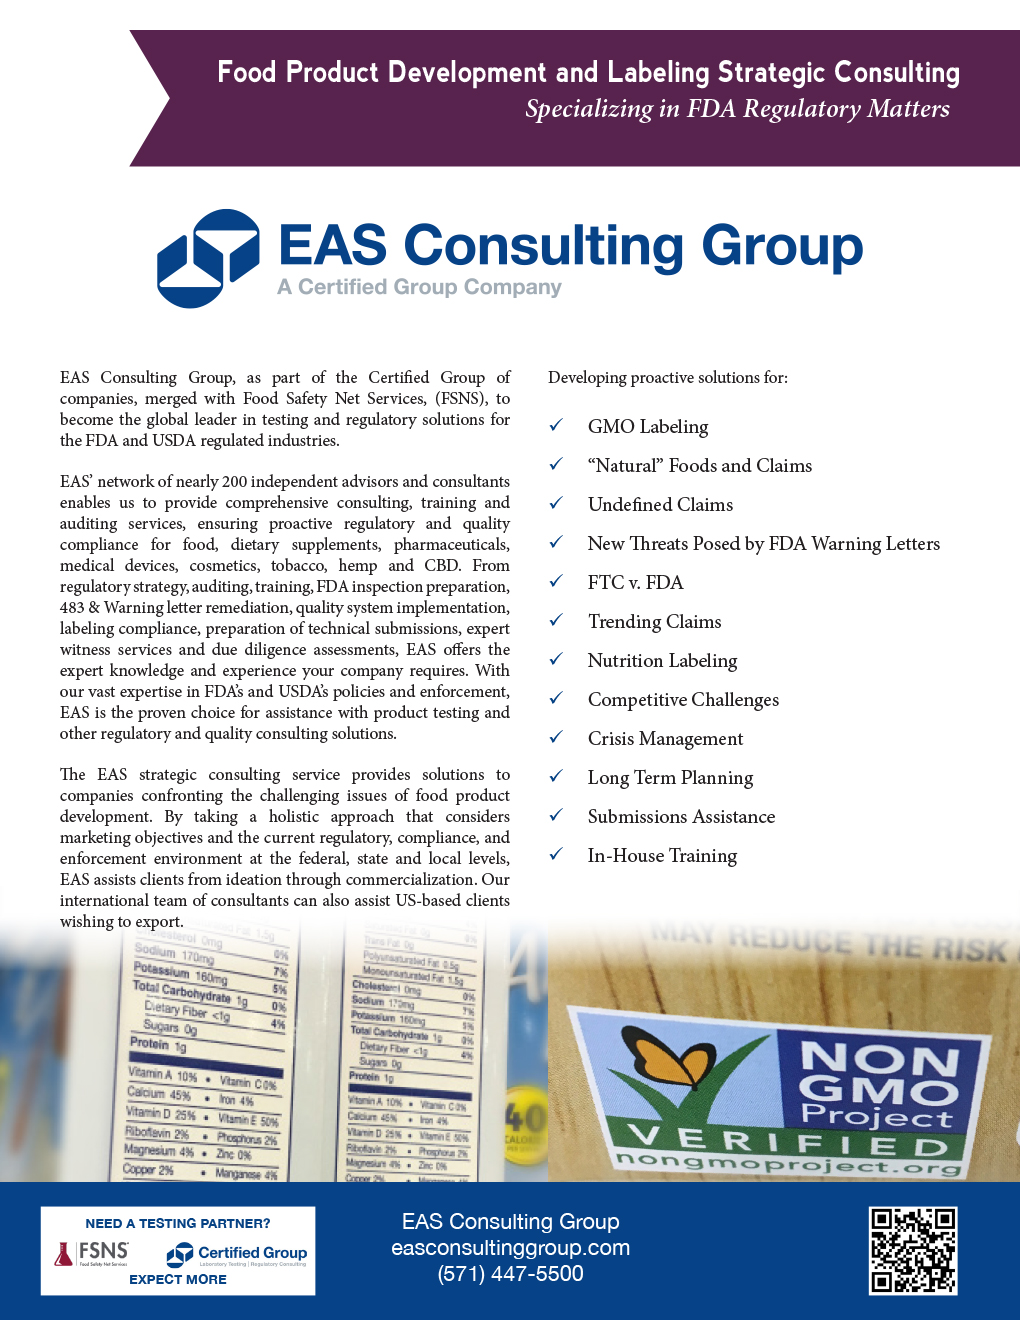 Food Product Development and Labeling Strategic Consulting Services